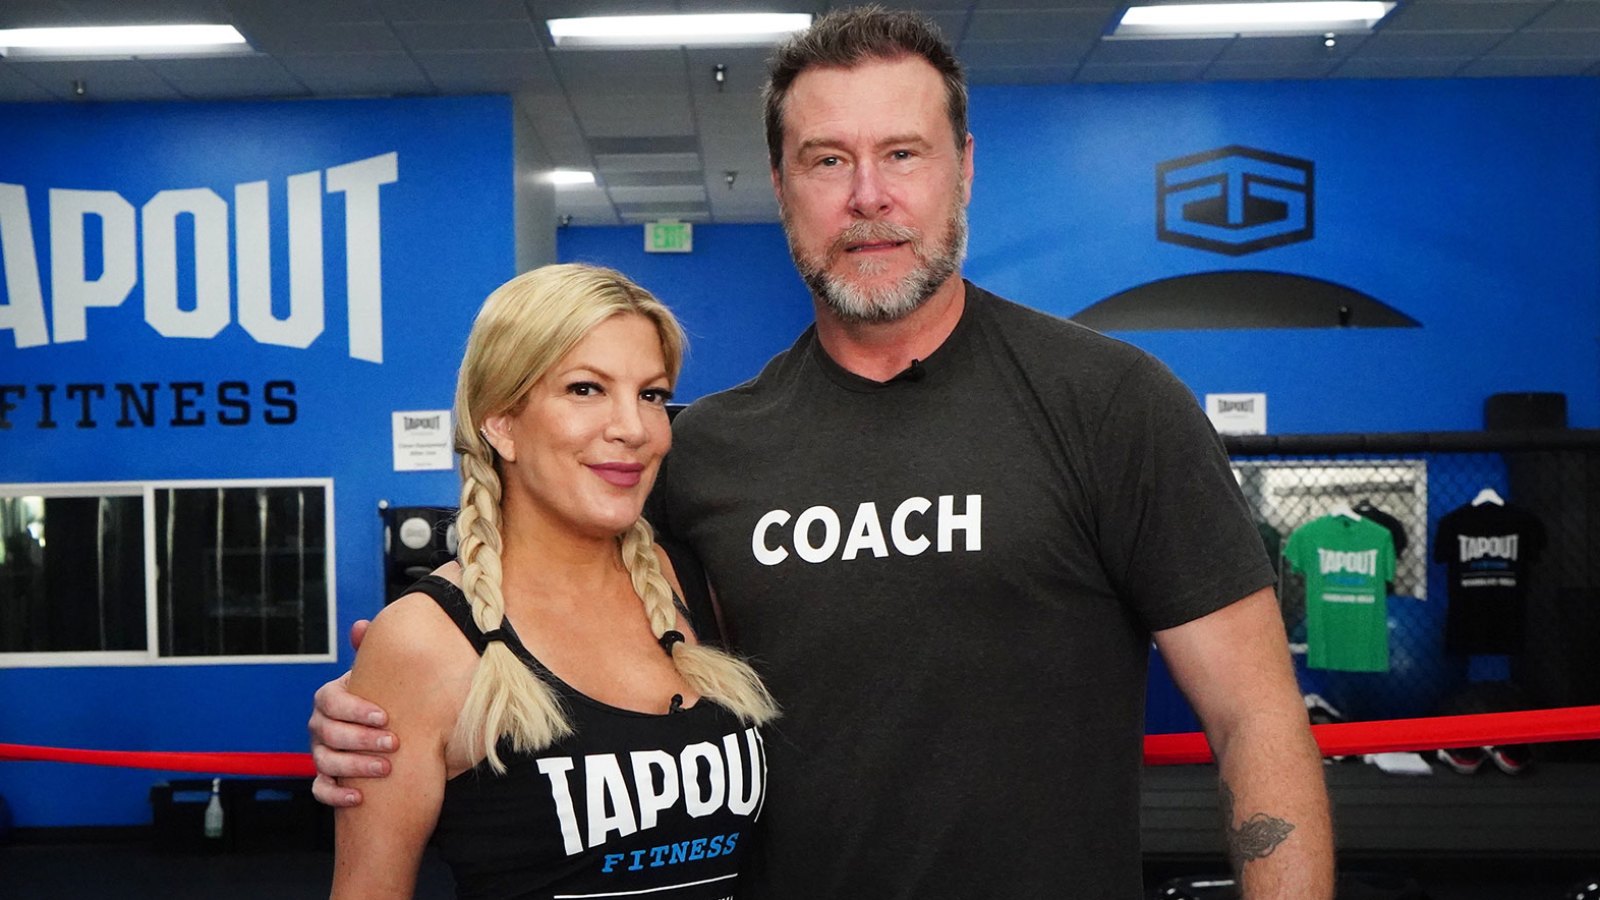 Dean McDermott Starting Boxing Class for Couples to Work Out Aggression